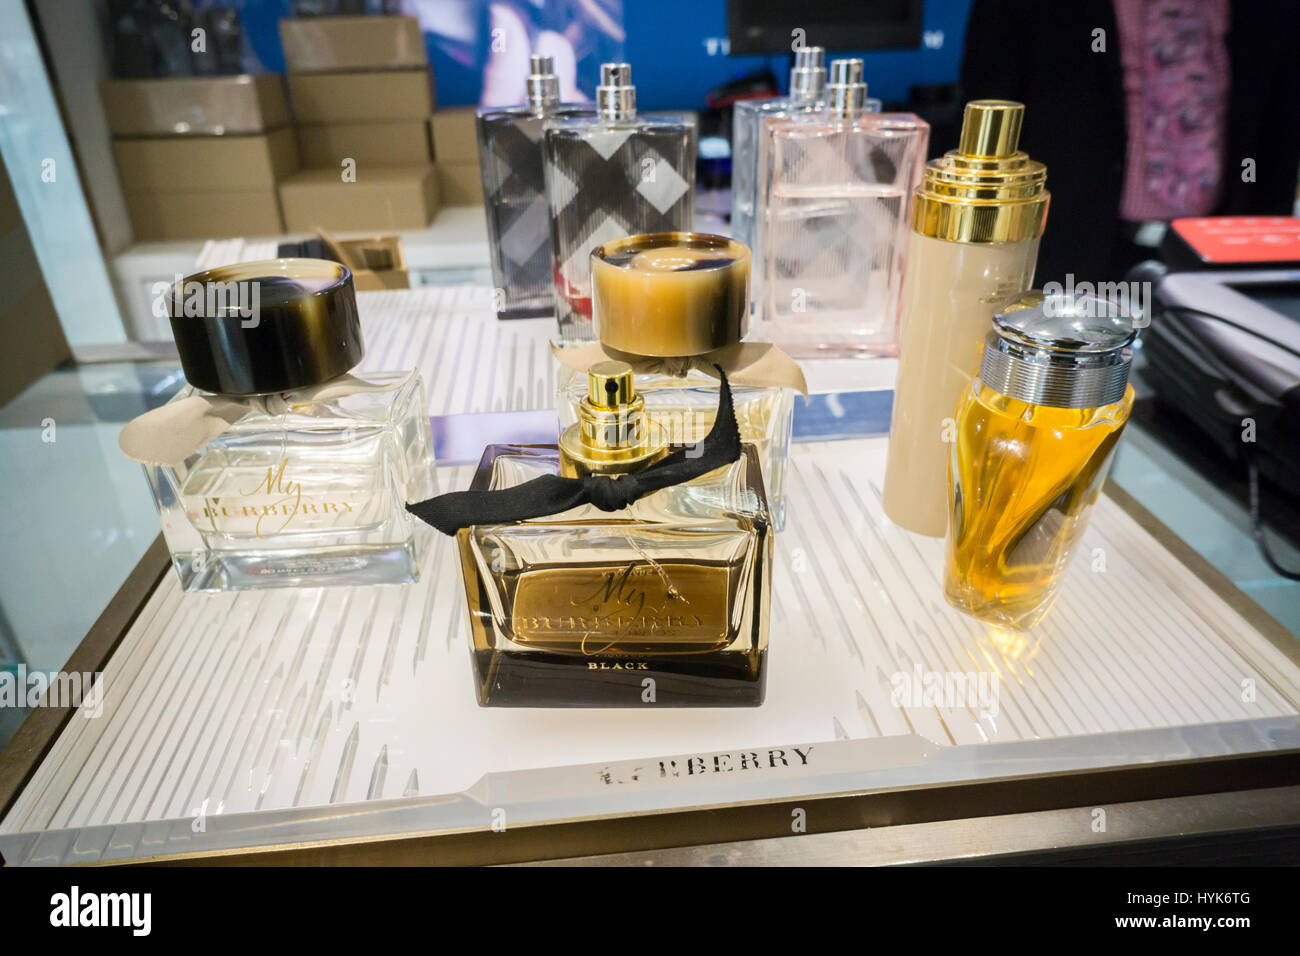 Testers of Burberry perfume are seen in Macy's Herald Square department  store in New York on Monday, April 3, 2017. Burberry has decided to license  its fragrance and cosmetics business, My Burberry